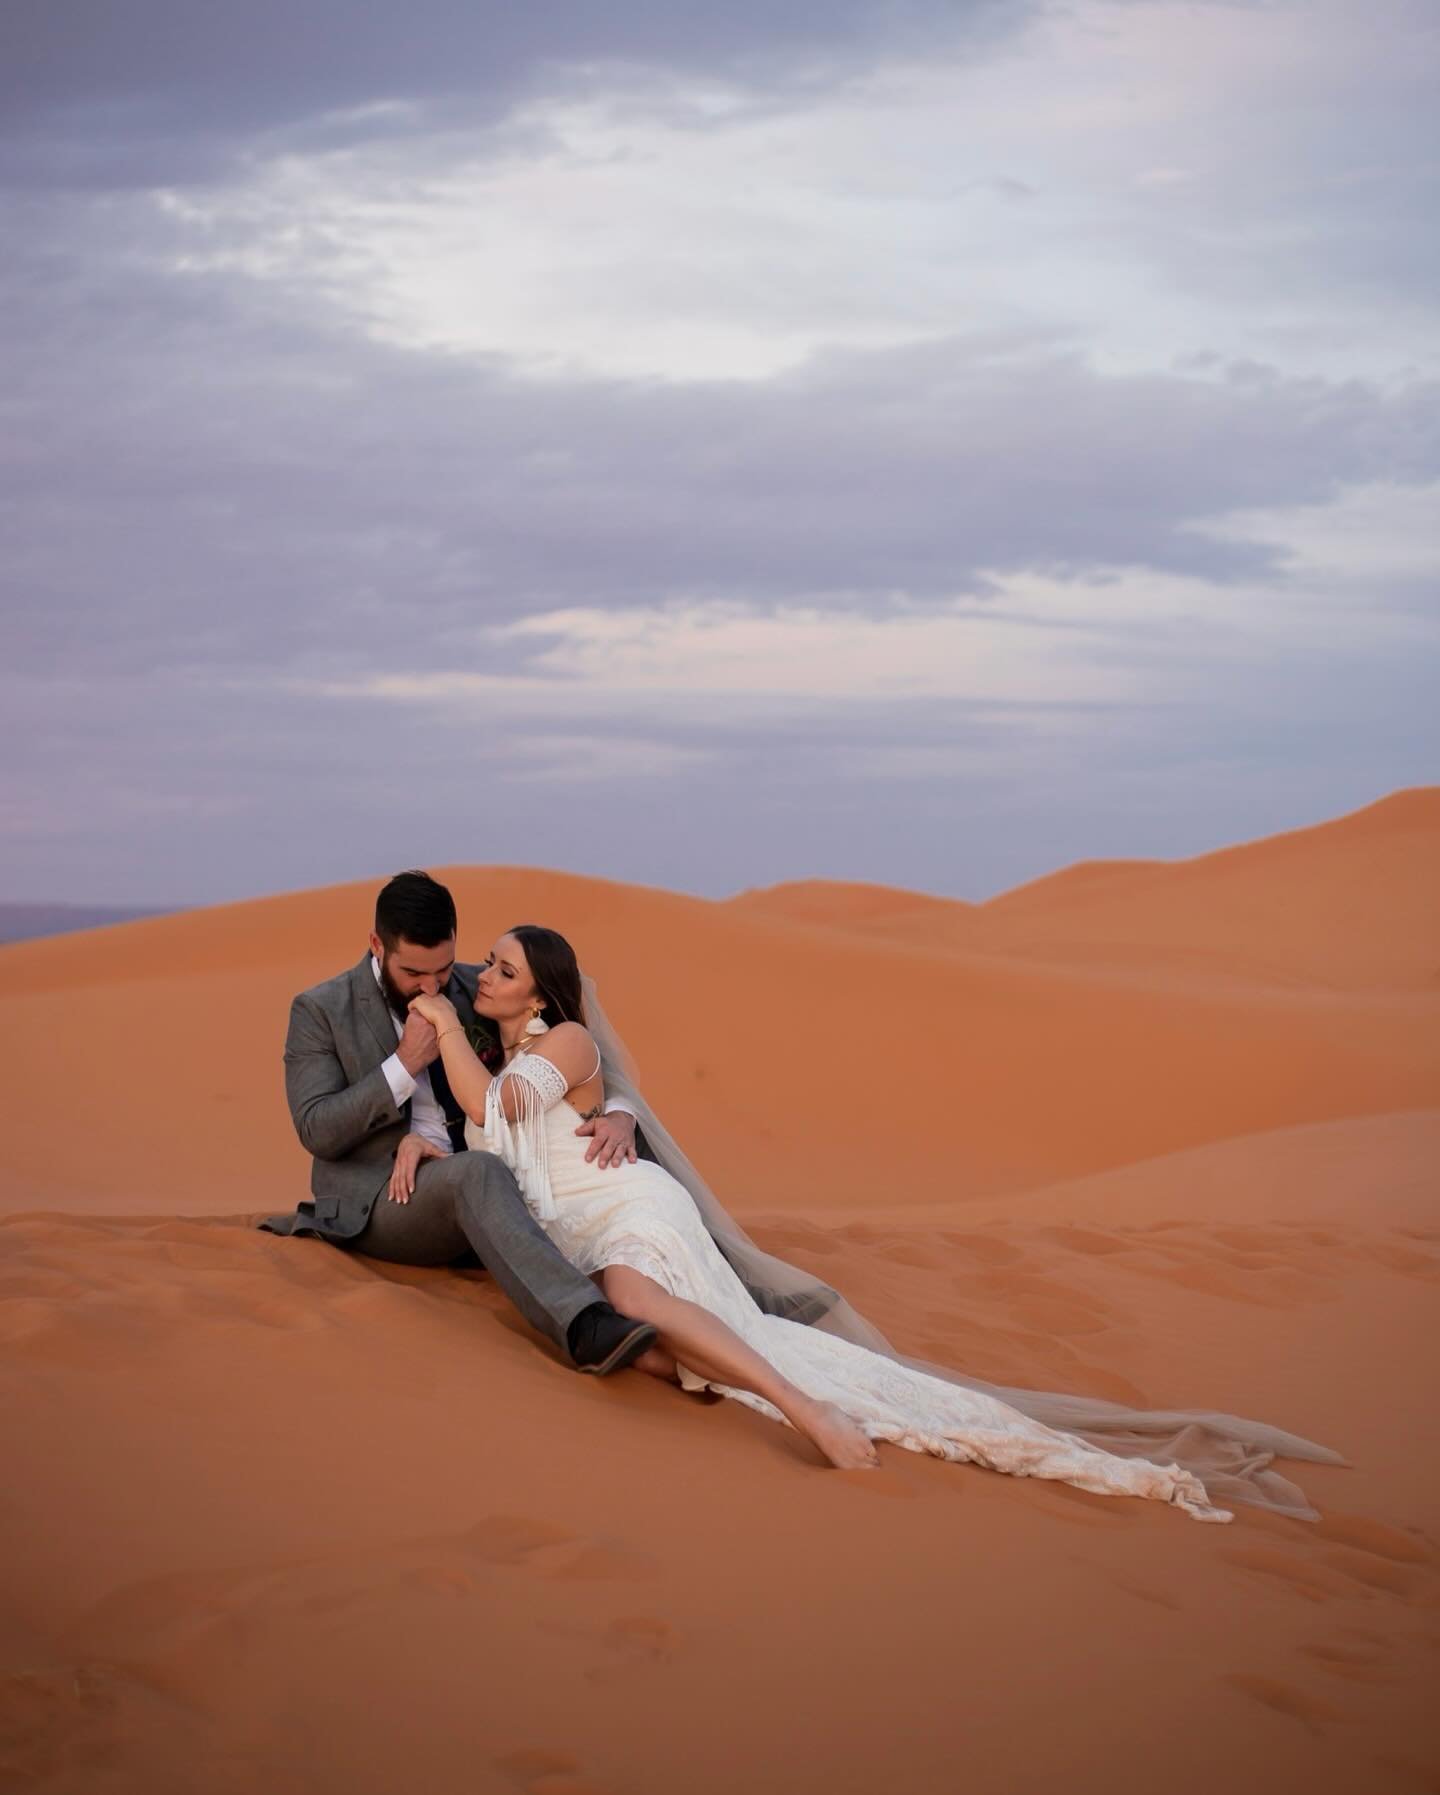 Back when Jacqui and Jim travelled from the US to elope in the dreamy Merzouga desert, just the two of them celebrating their love in the vast dunes 💛

#elopeinmorocco #elopeinmarrakech #elopementphotography #adventurephotography #merzouga #merzouga